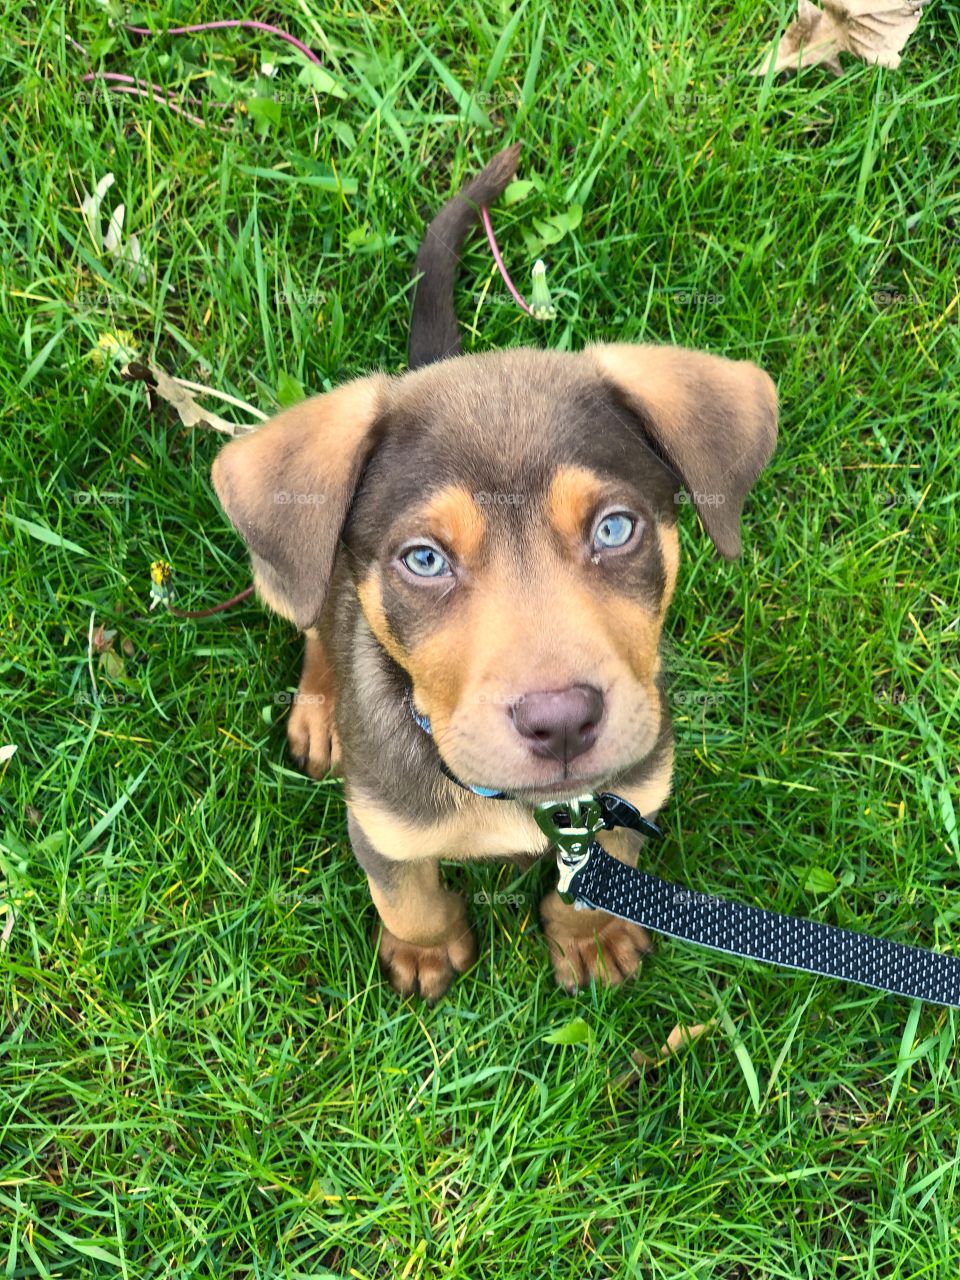 Adorable Brown Puppy on a Leash